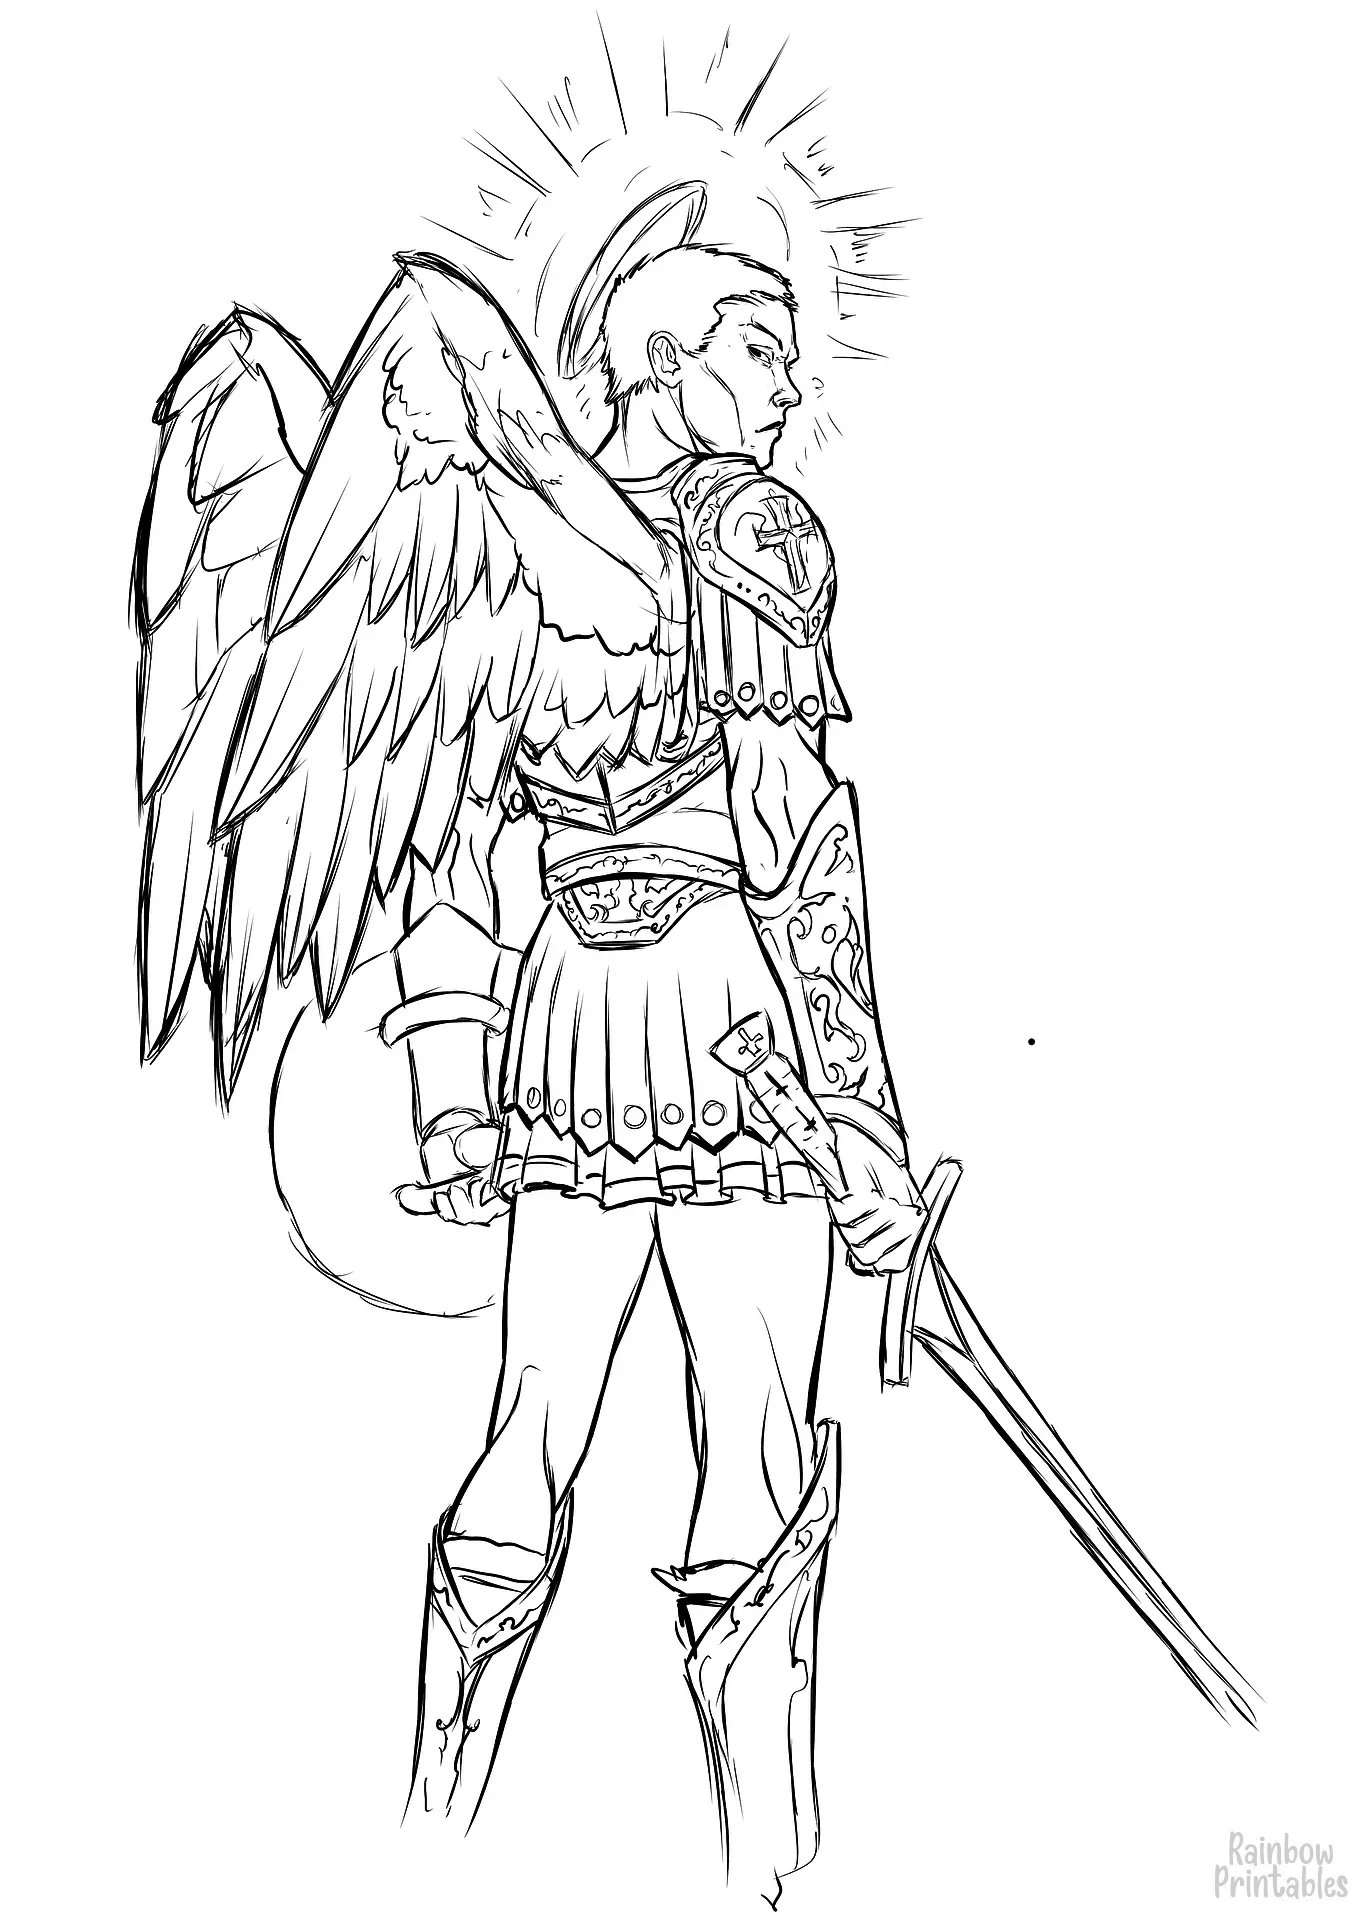 SIMPLE-EASY-line-drawings-Angel-Michael-Wings-Sword-and-Clouds-coloring-page-for-kids